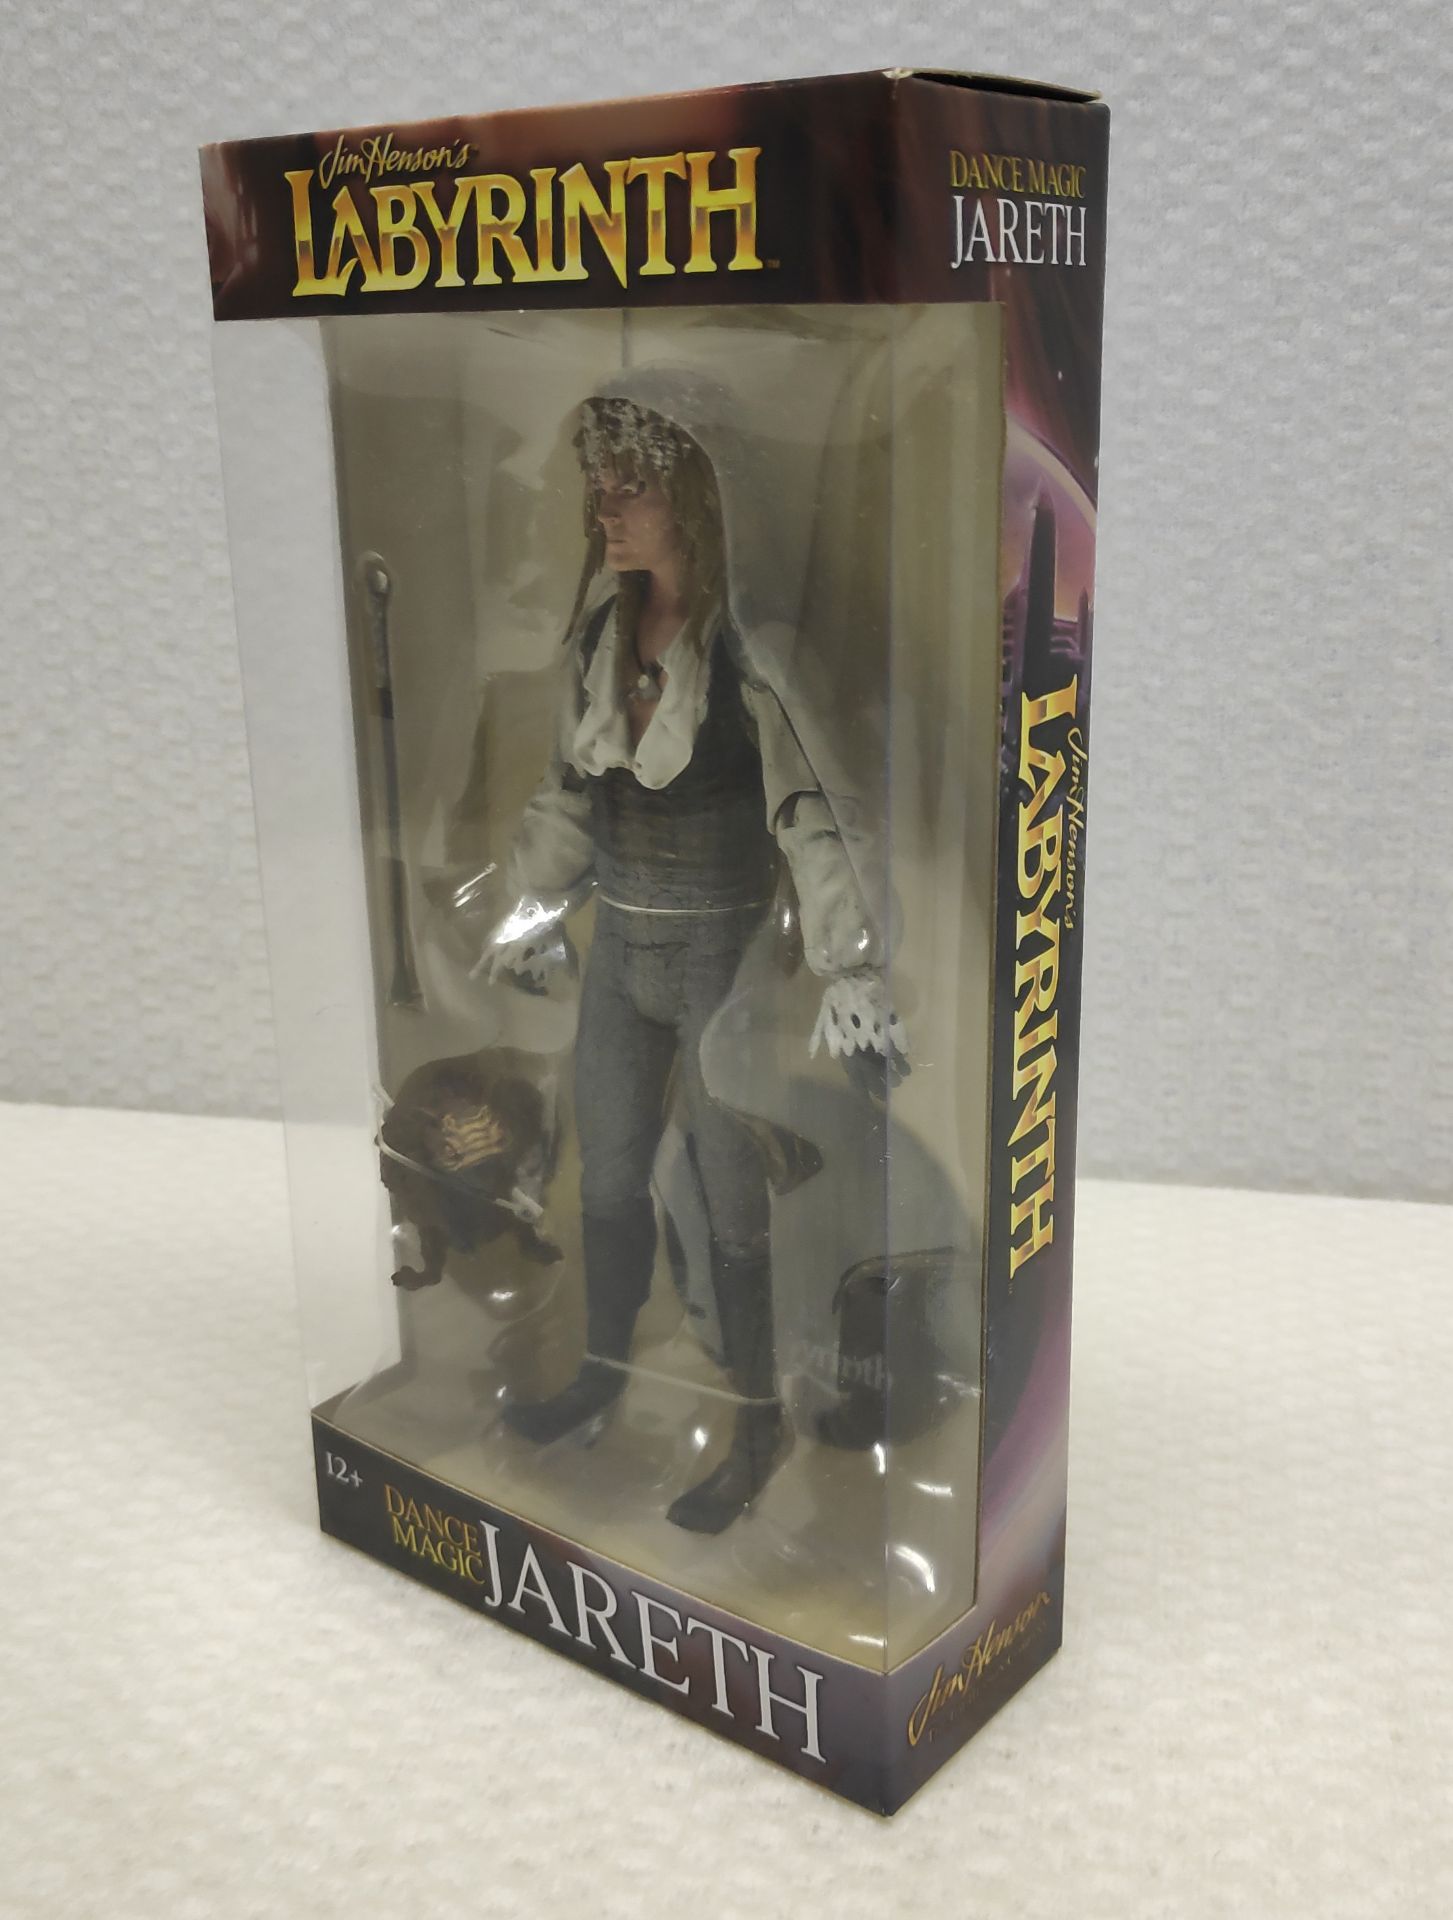 1 x David Bowie Dance Magic Jareth Action Figure From Labyrinth - McFarlane Toys - New/Boxed - HTYS1 - Image 9 of 10